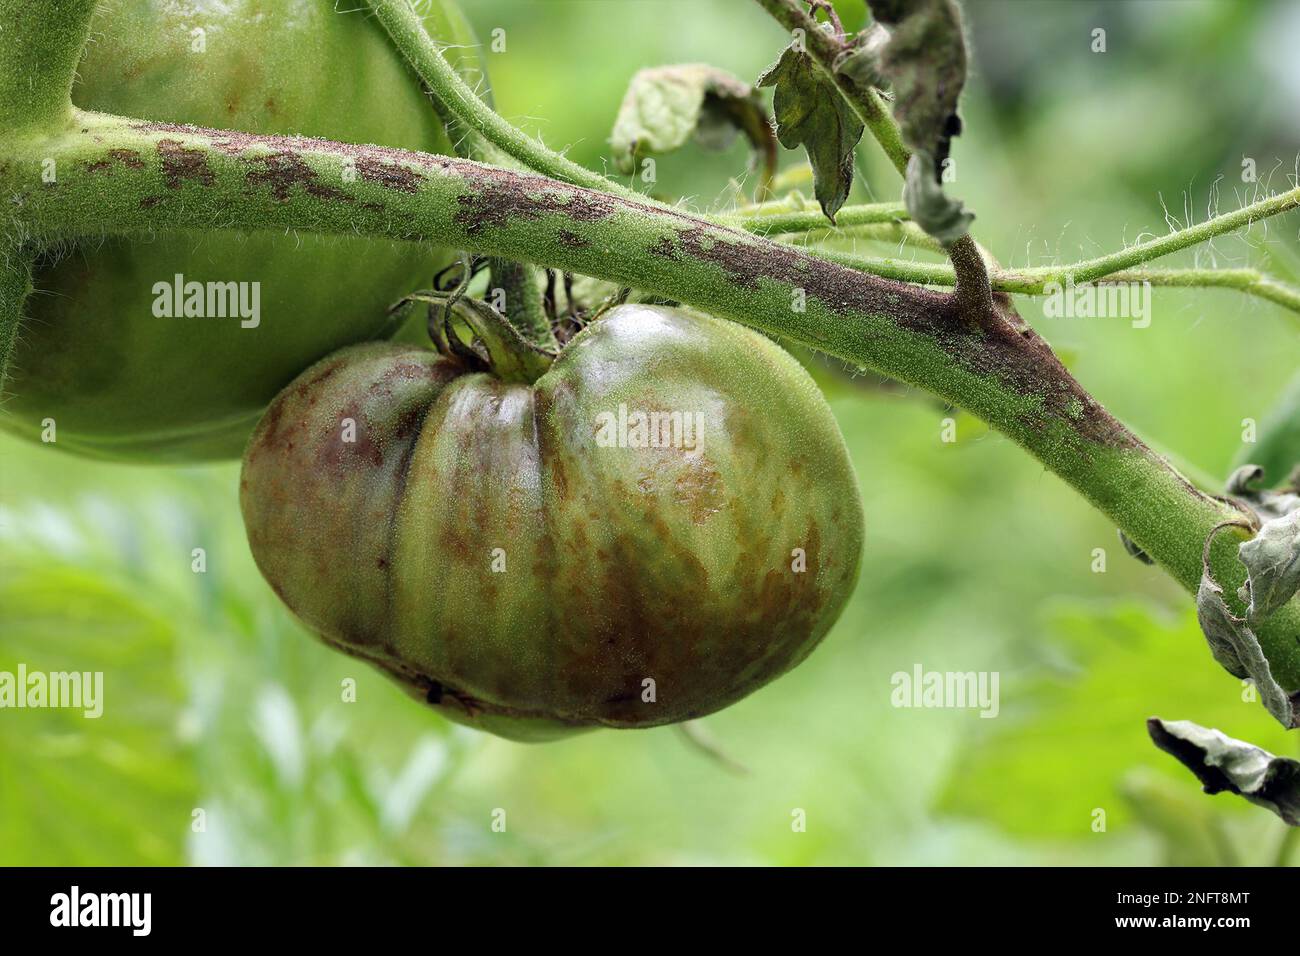 The tomato plant and unripe tomato are infected with late blight caused by fungus-like microorganism Phytophthora infestans. Stems, leaves, and fruits Stock Photo